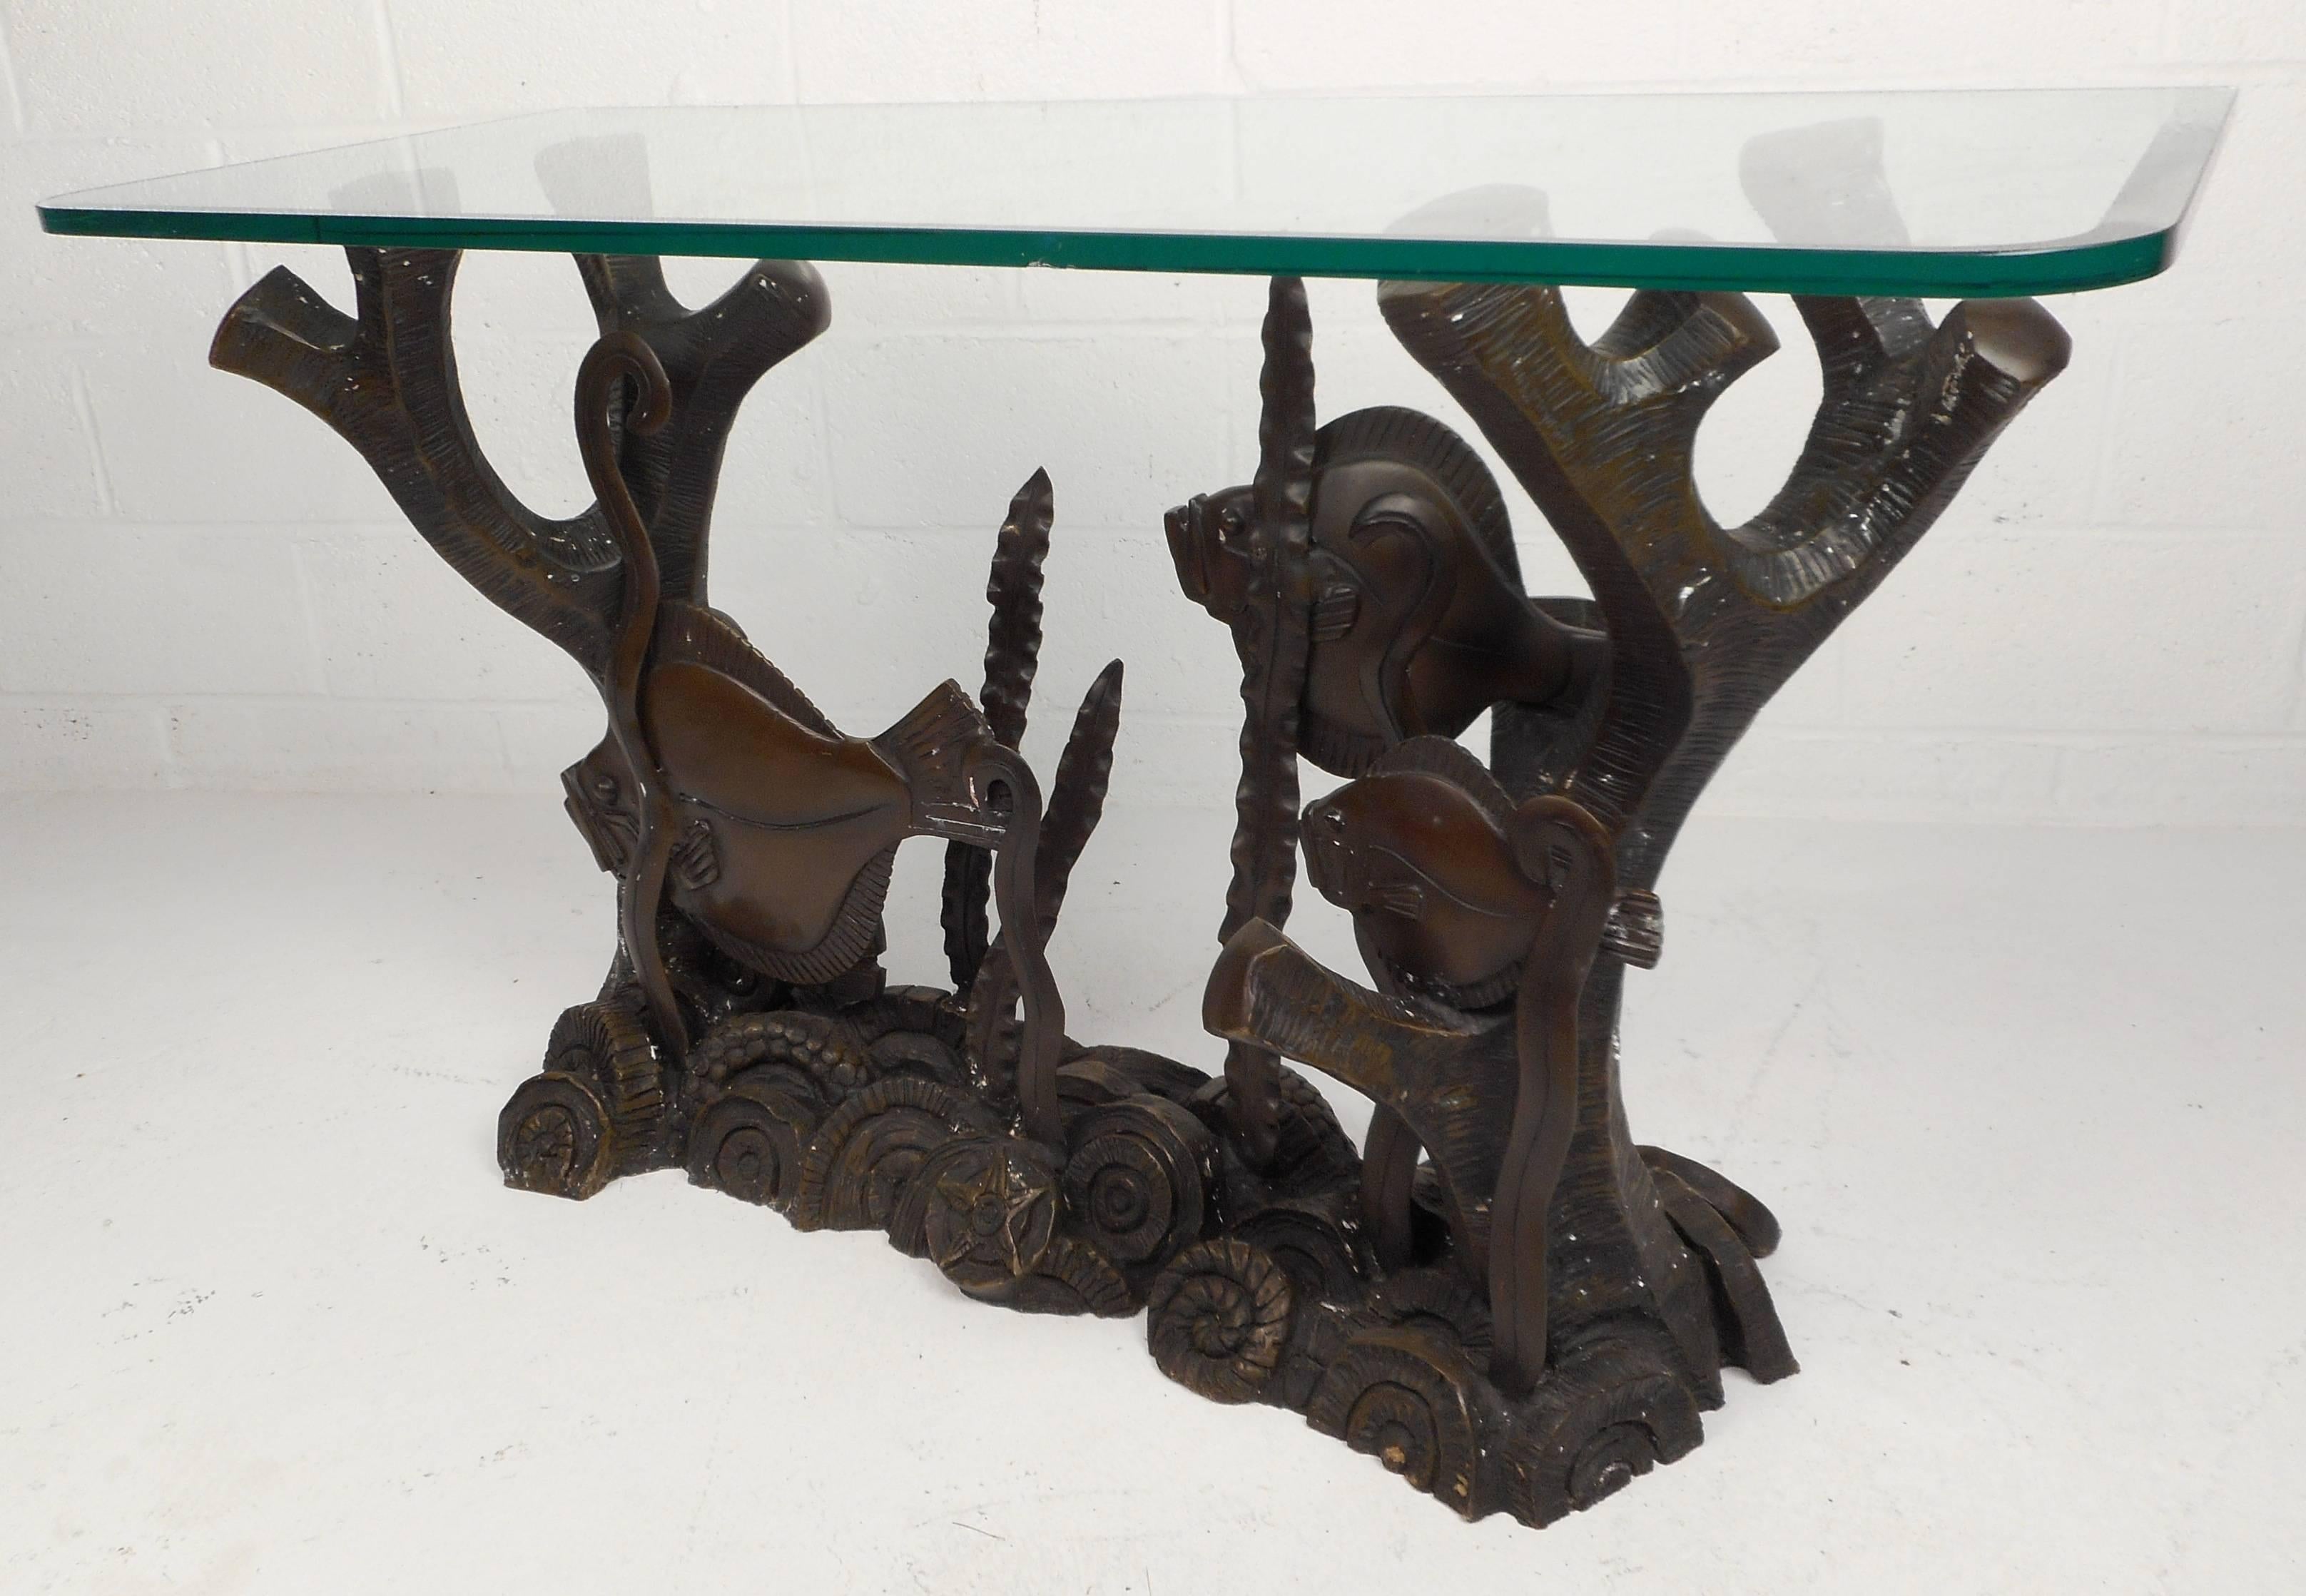 This stunning vintage bronze console table features a unique 